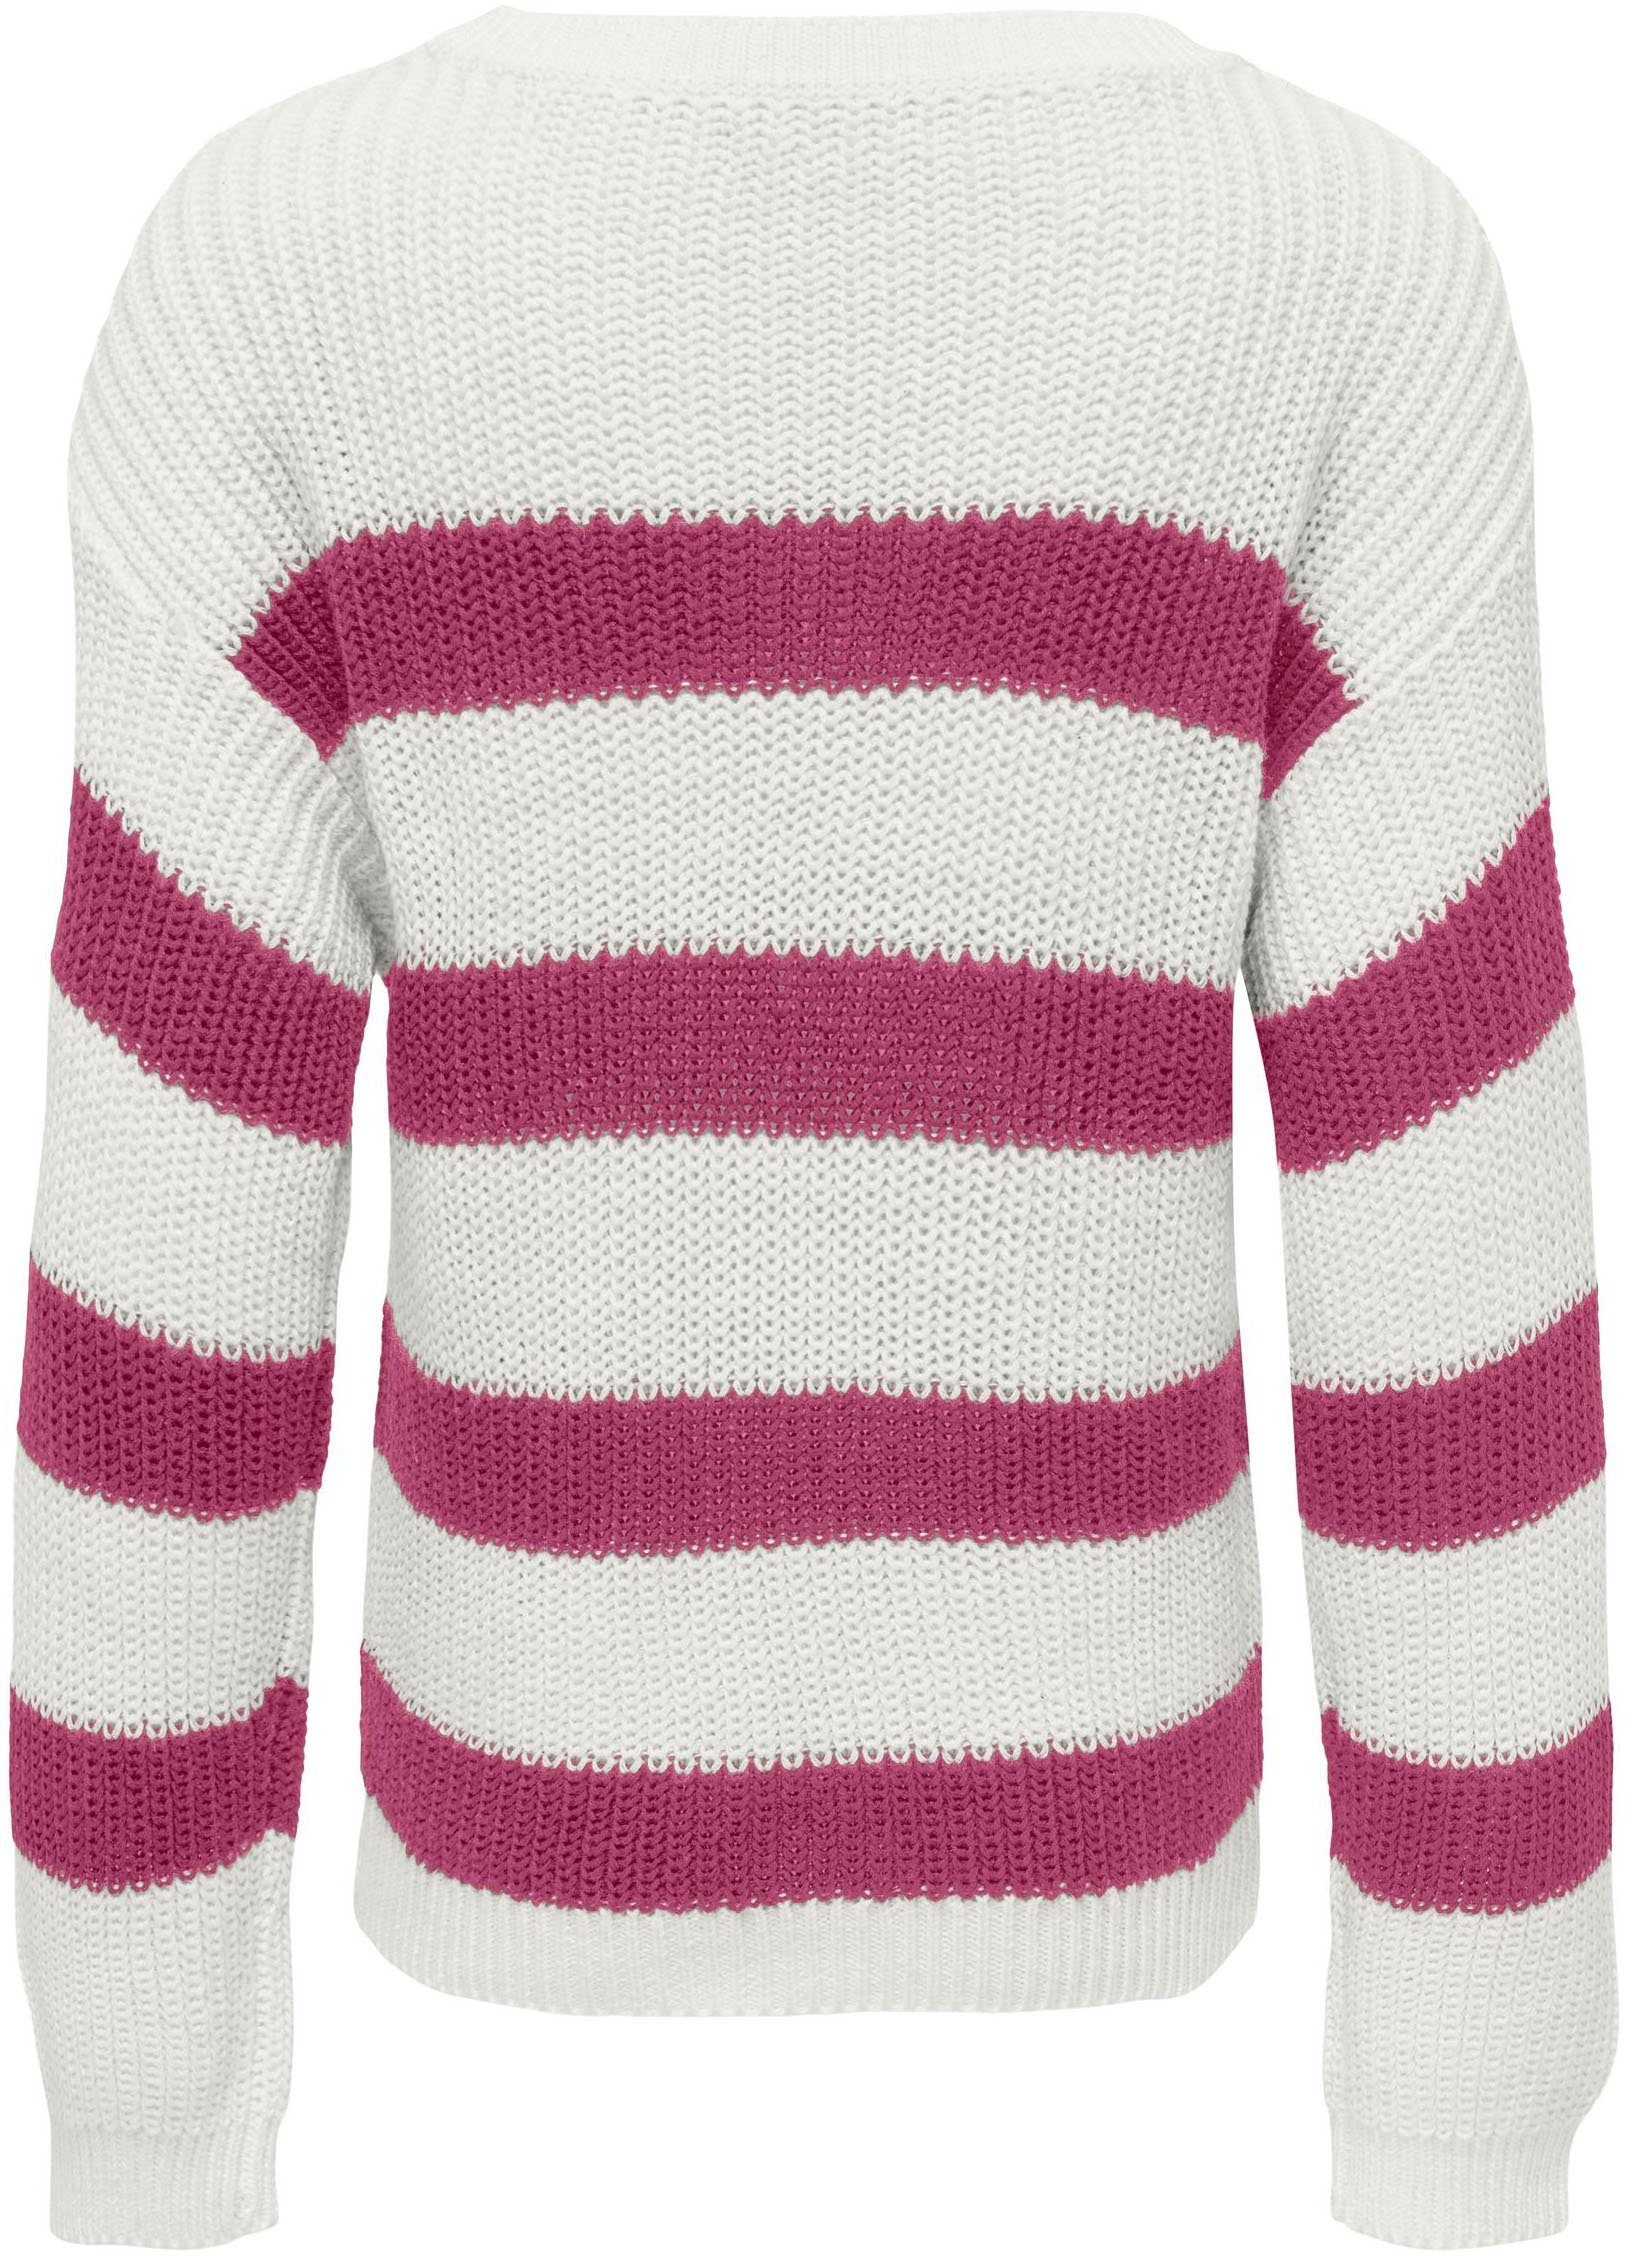 PULLOVER Strickpullover STRIPED ONLY KNT KIDS KOGSIF LS